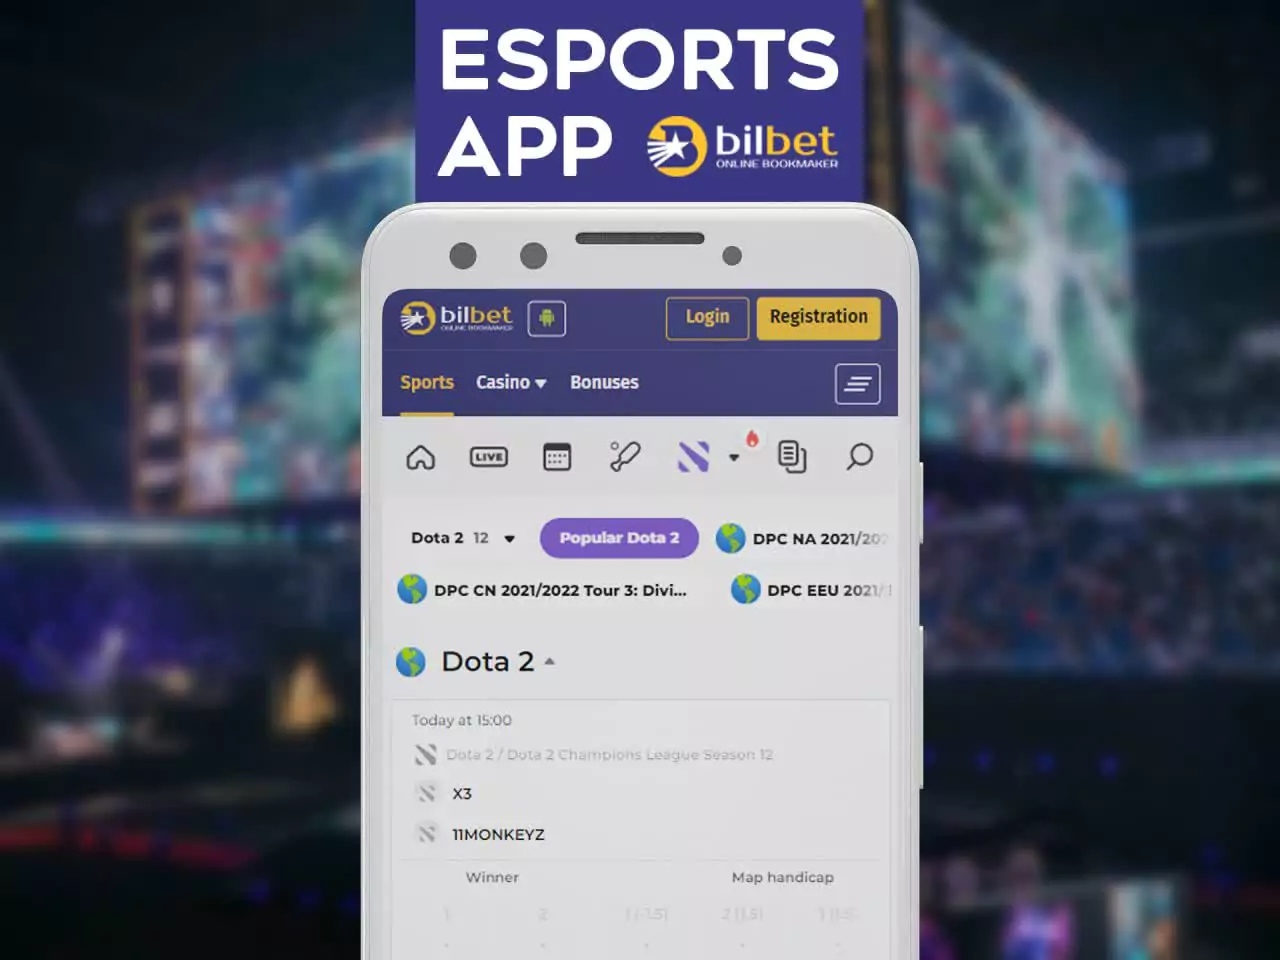 You can also bet on esports in the Bilbet app.